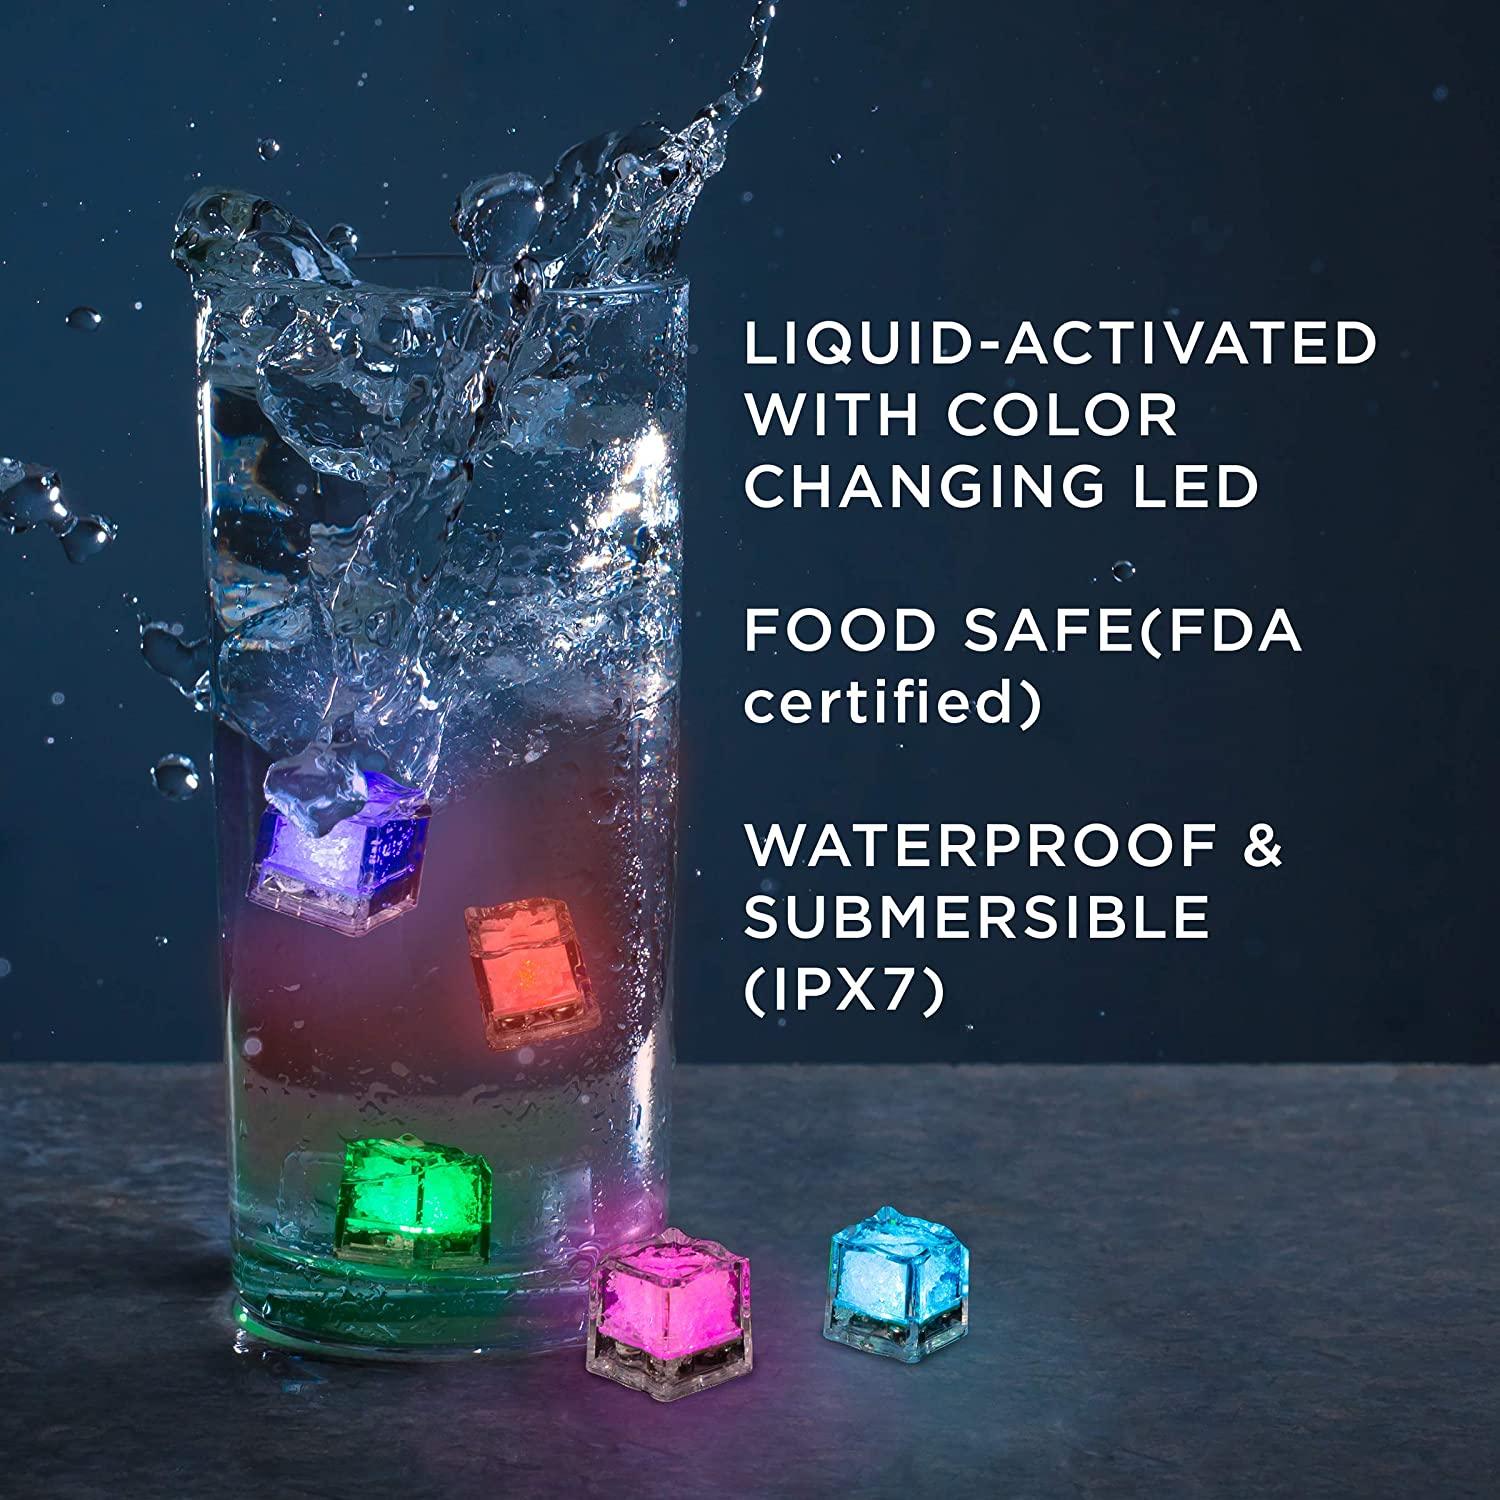 Glow LED Ice Cube Shape Lights Liquid Activated Submersible, Reusable-Color Change, Battery Operated for Weddings, Glow Parties - If you say i do